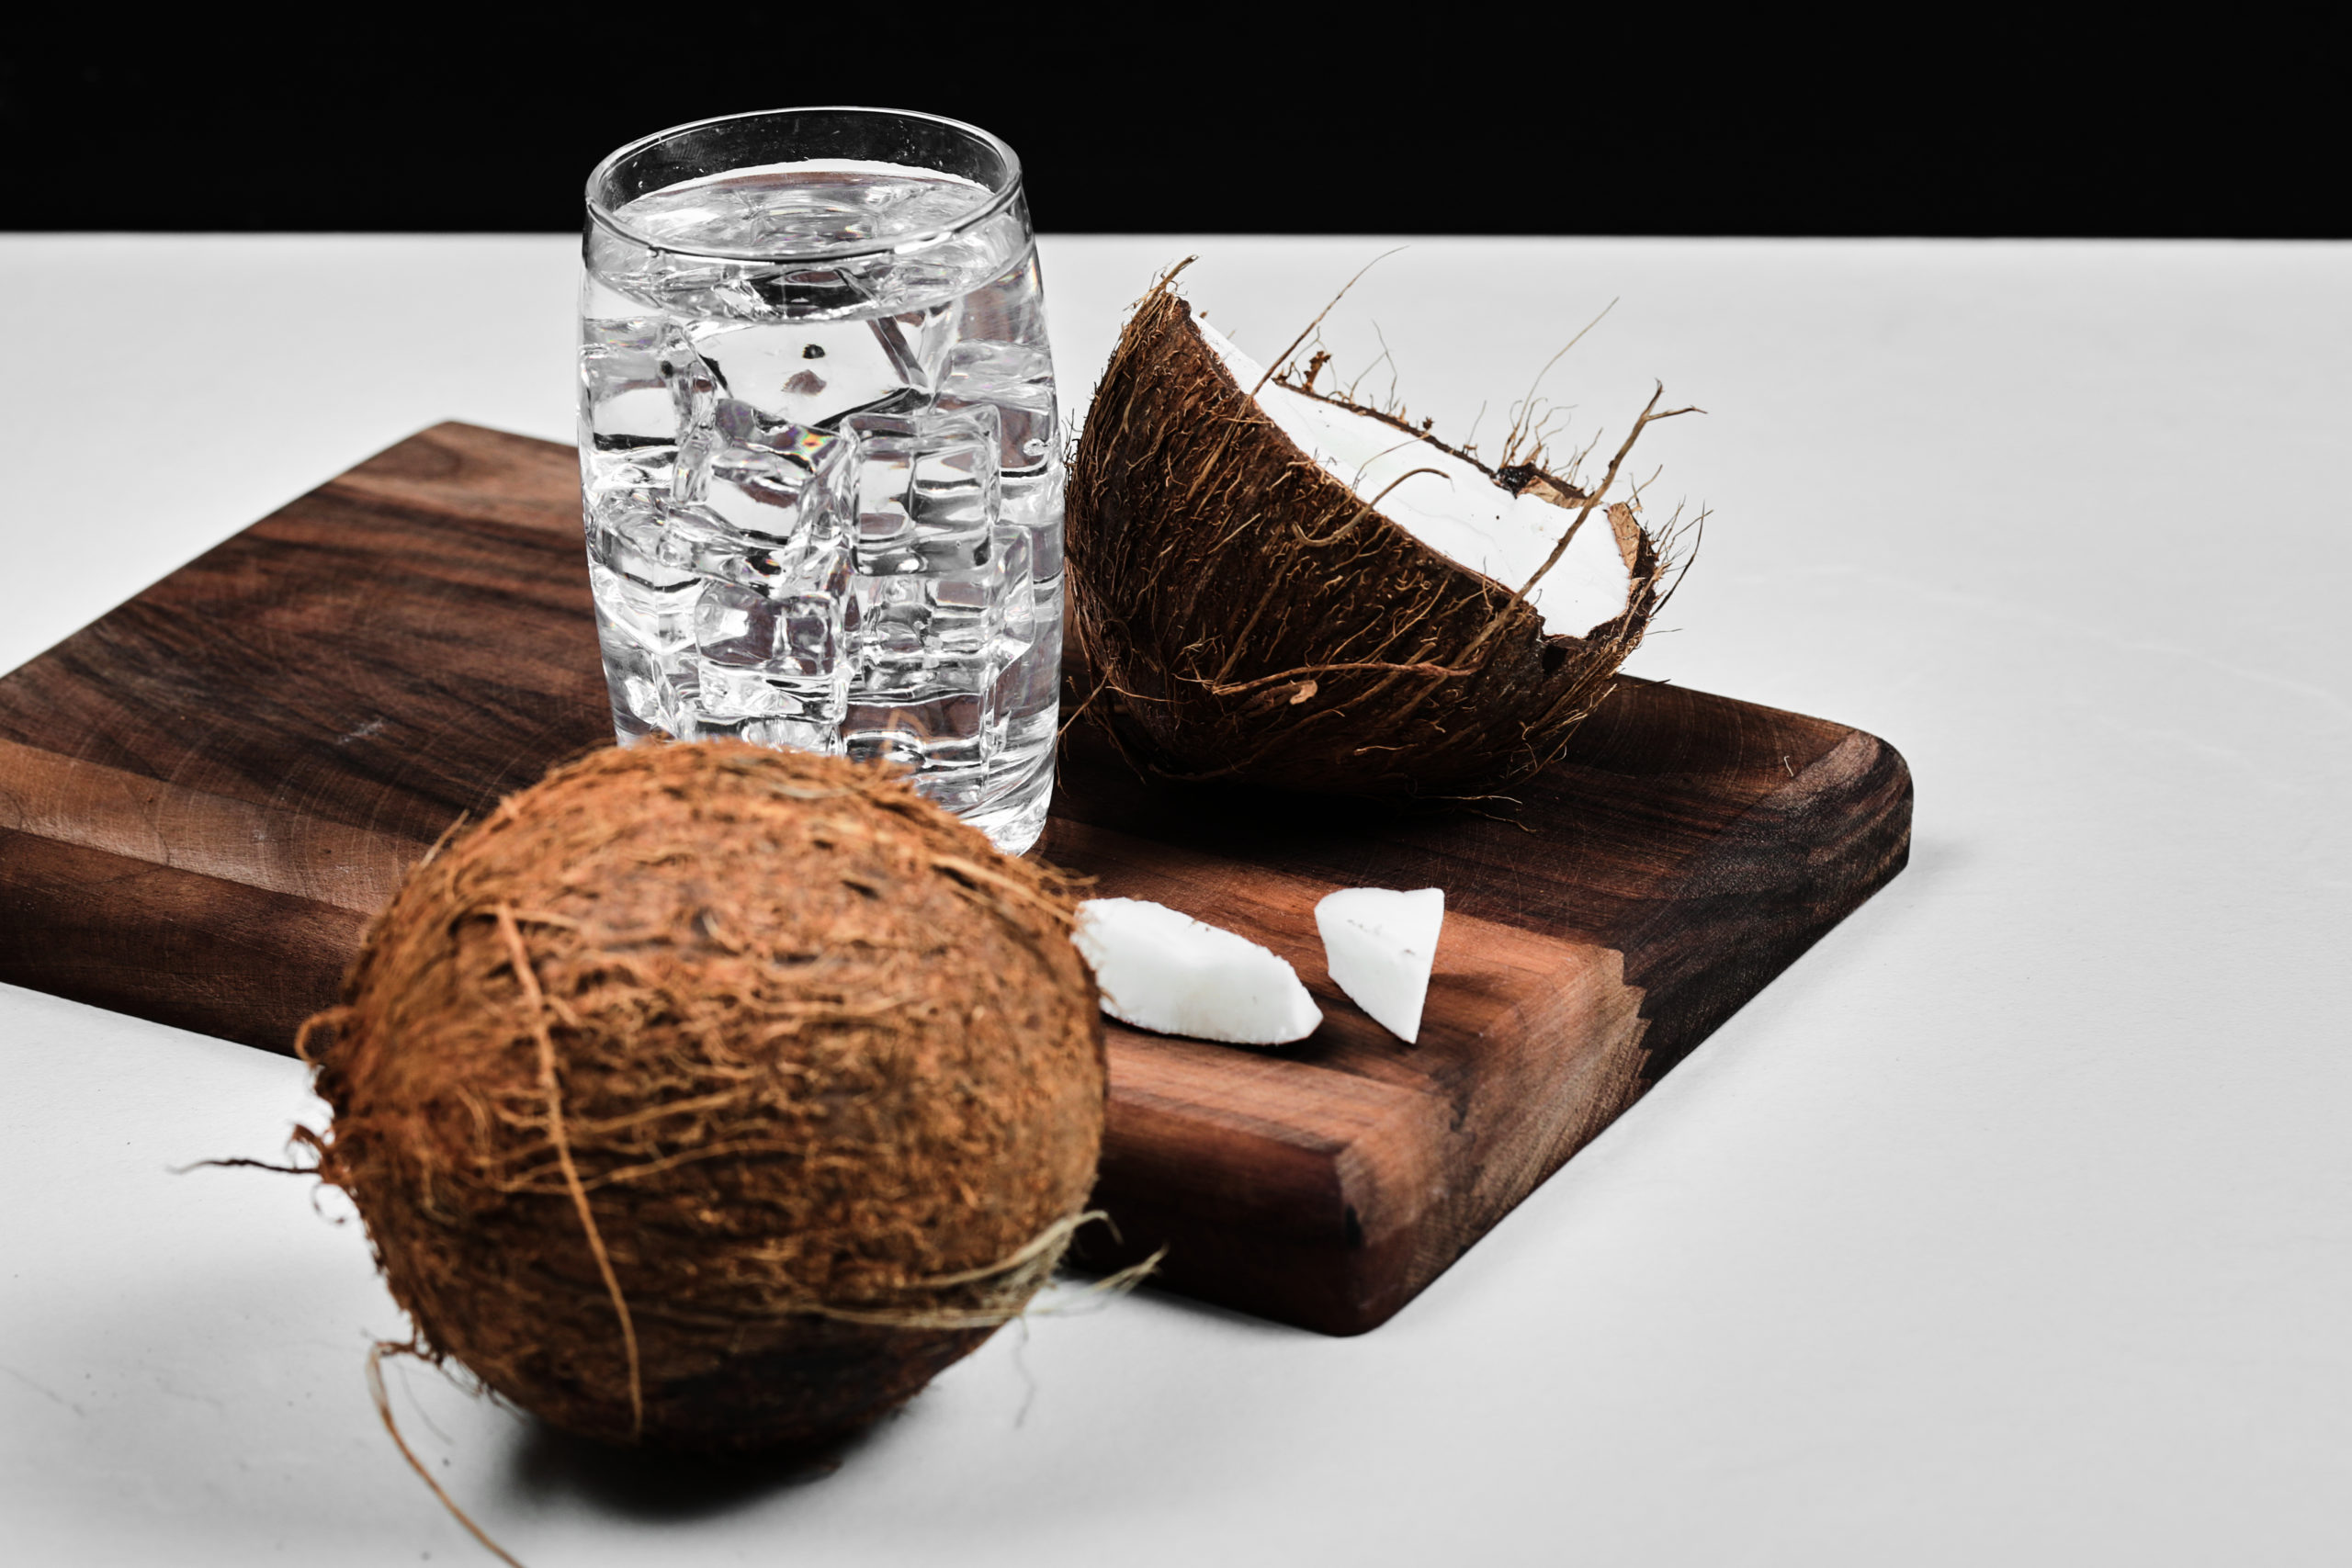 who fills water inside a coconut?